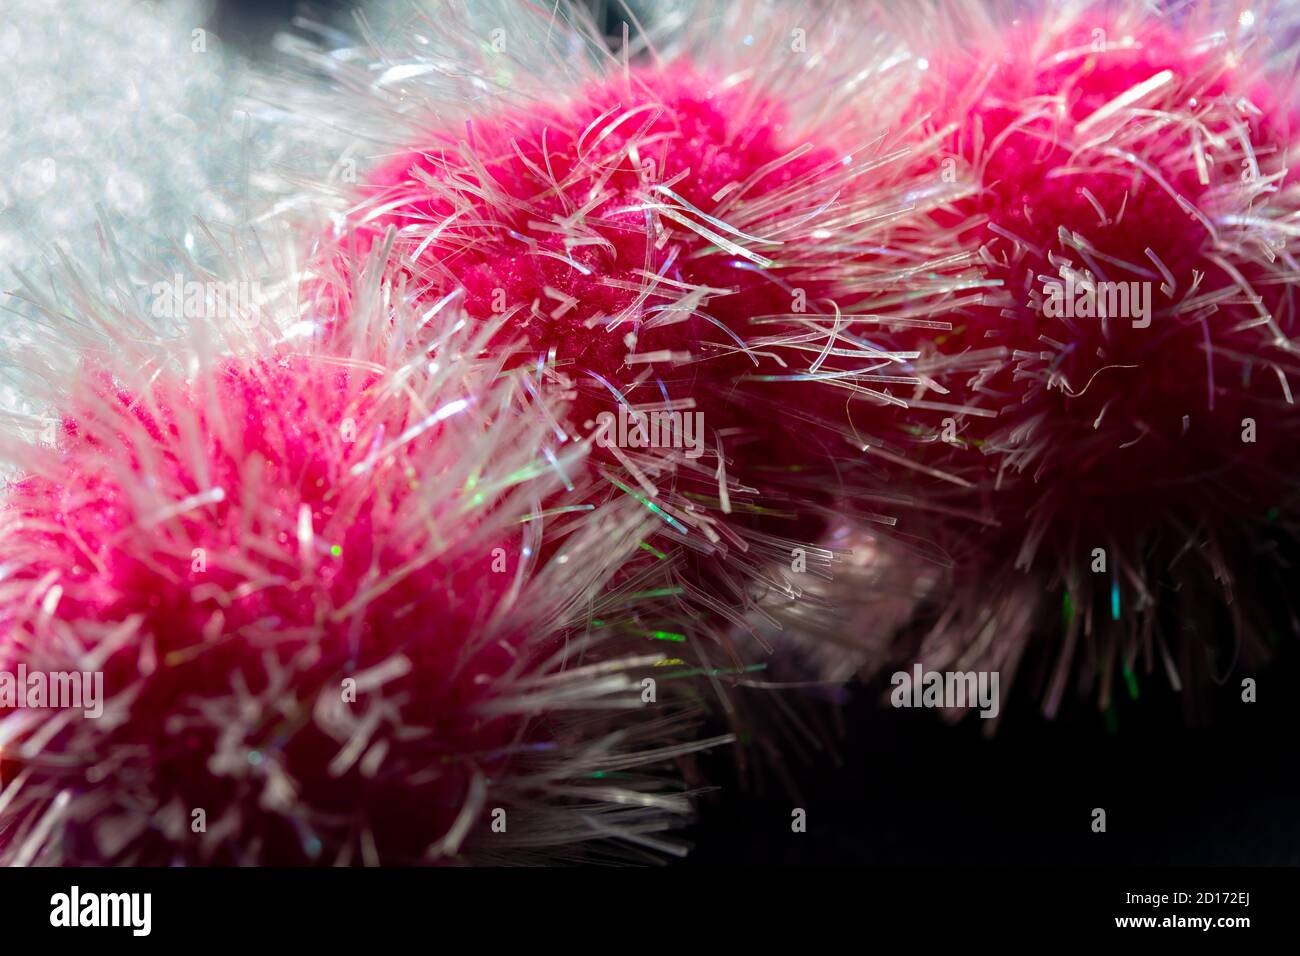 Pom High Stock Photography and - Alamy